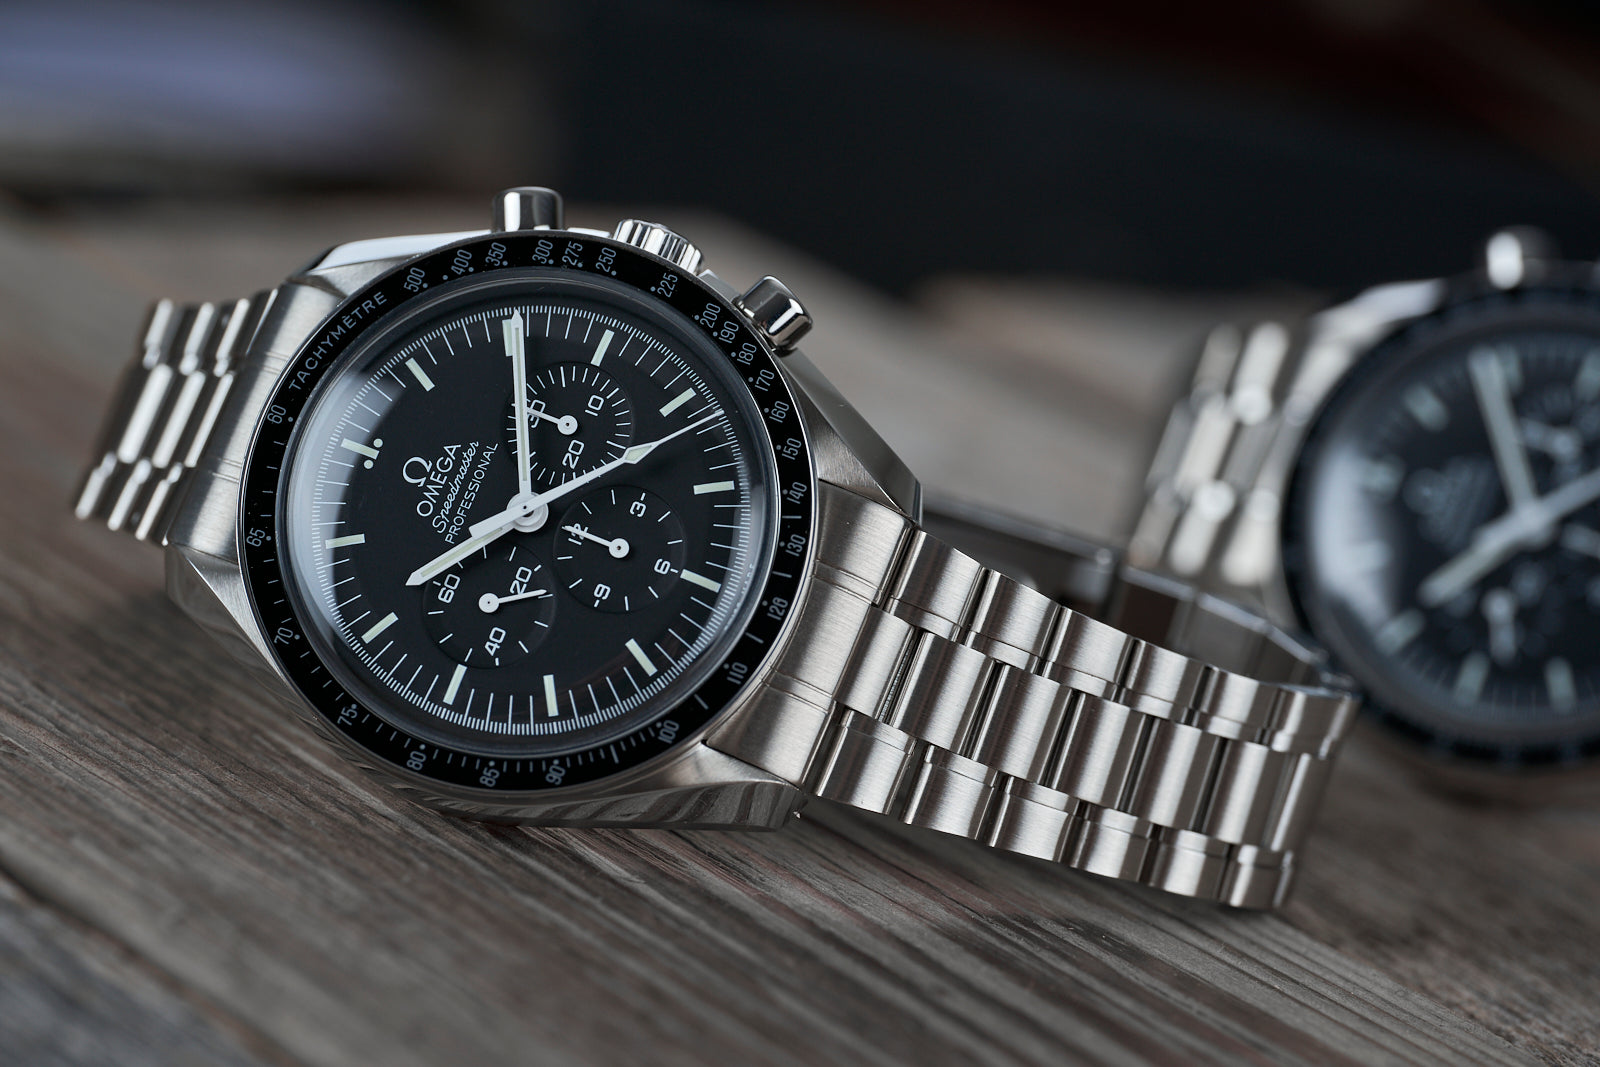 What's the best aftermarket bracelet for the Speedmaster? : r/OmegaWatches